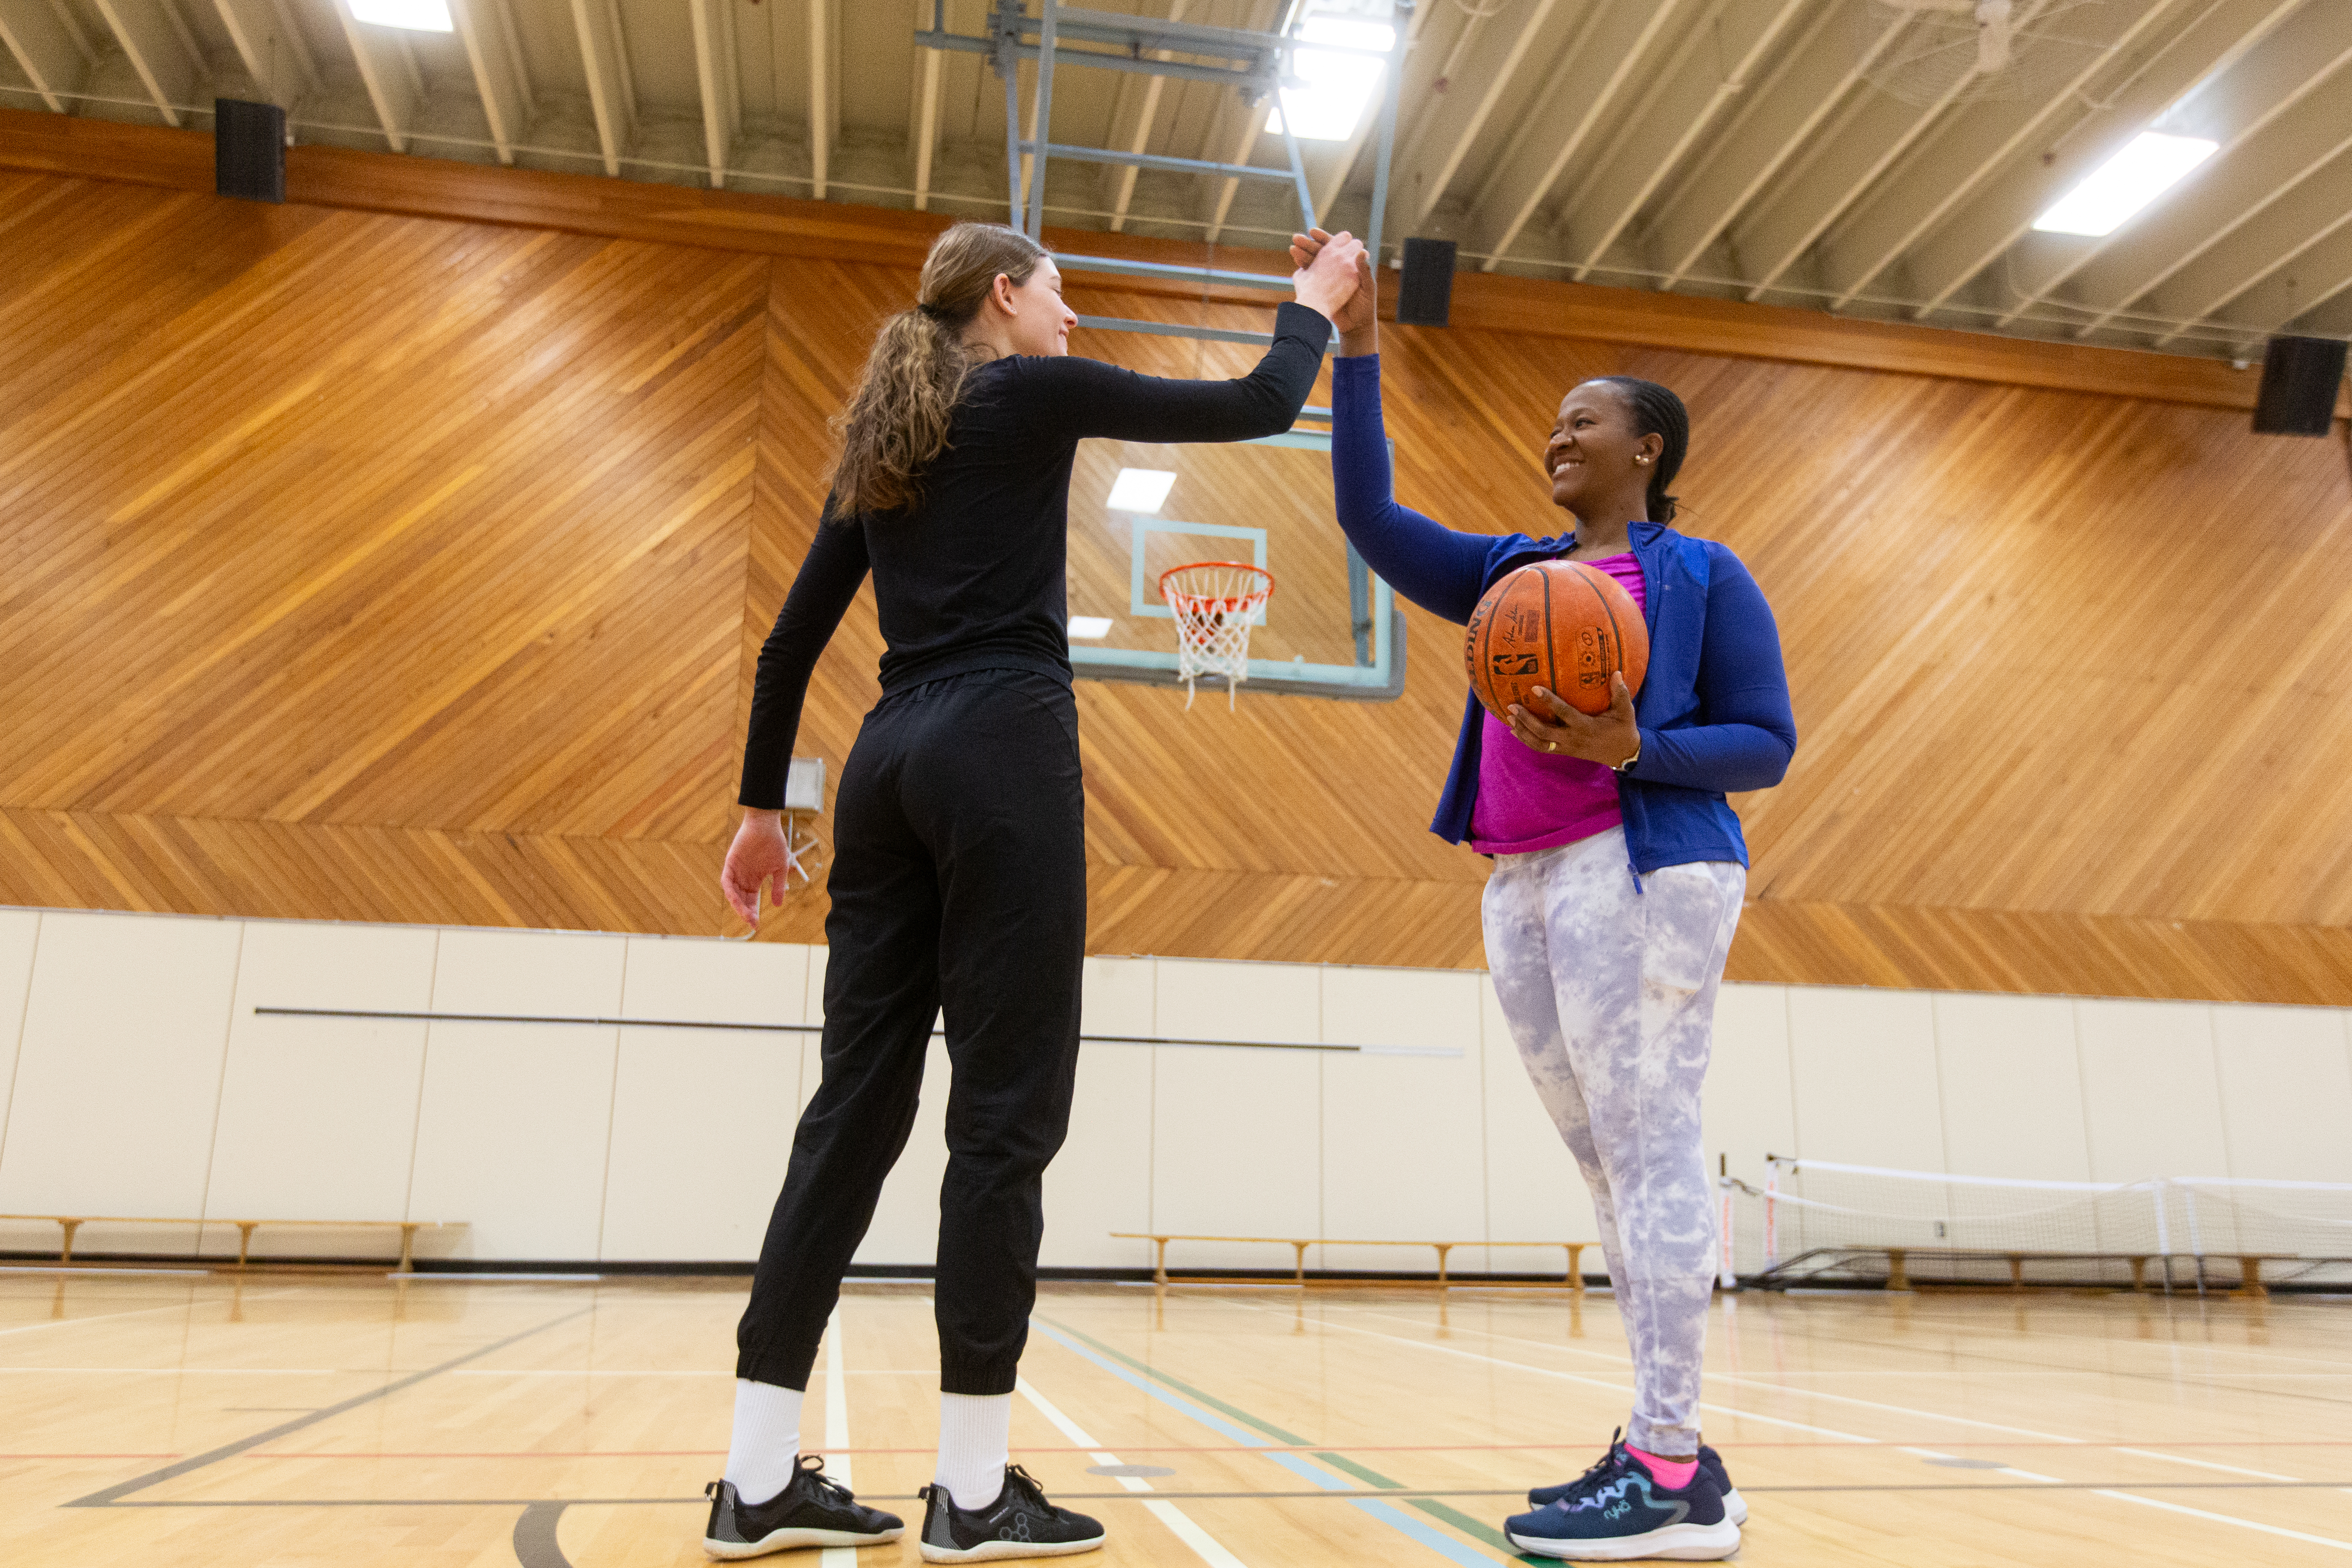 Two people high-fiving in a gym on a basketball court